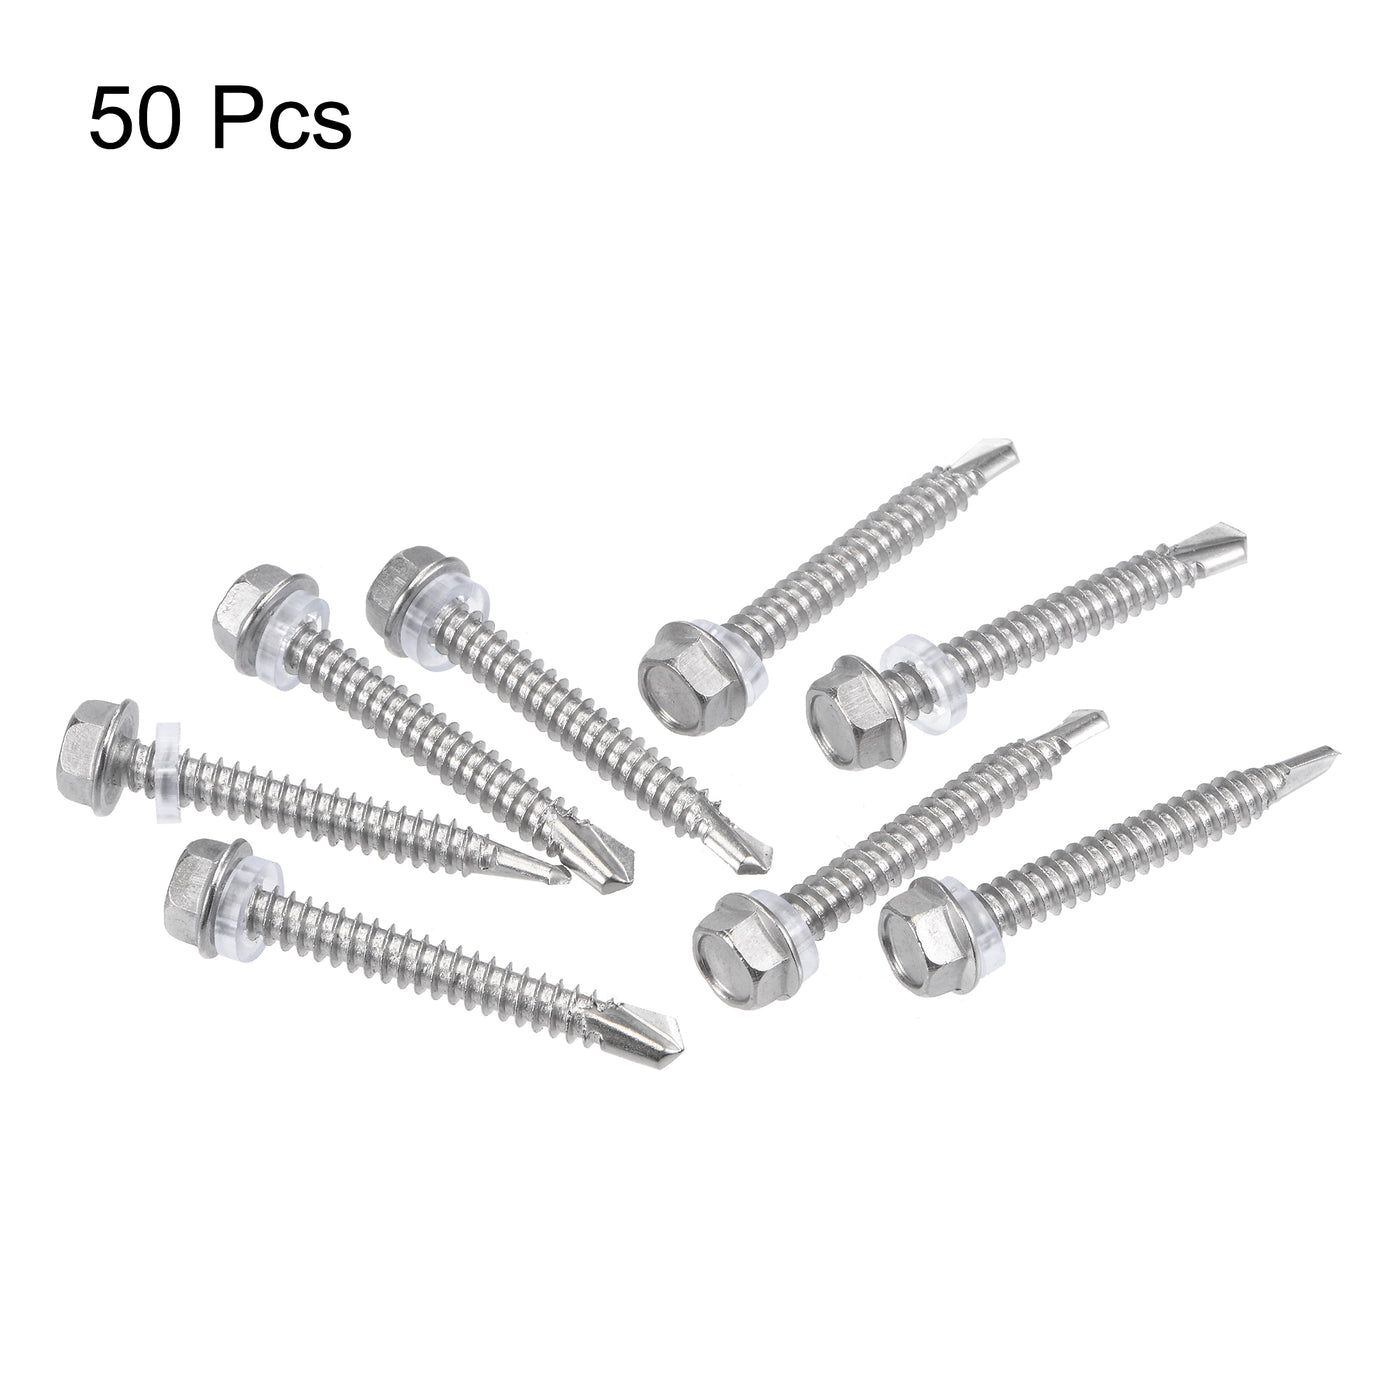 uxcell Uxcell #14 x 1 31/32" 410 Stainless Steel Hex Washer Head Self Drilling Screws 50pcs